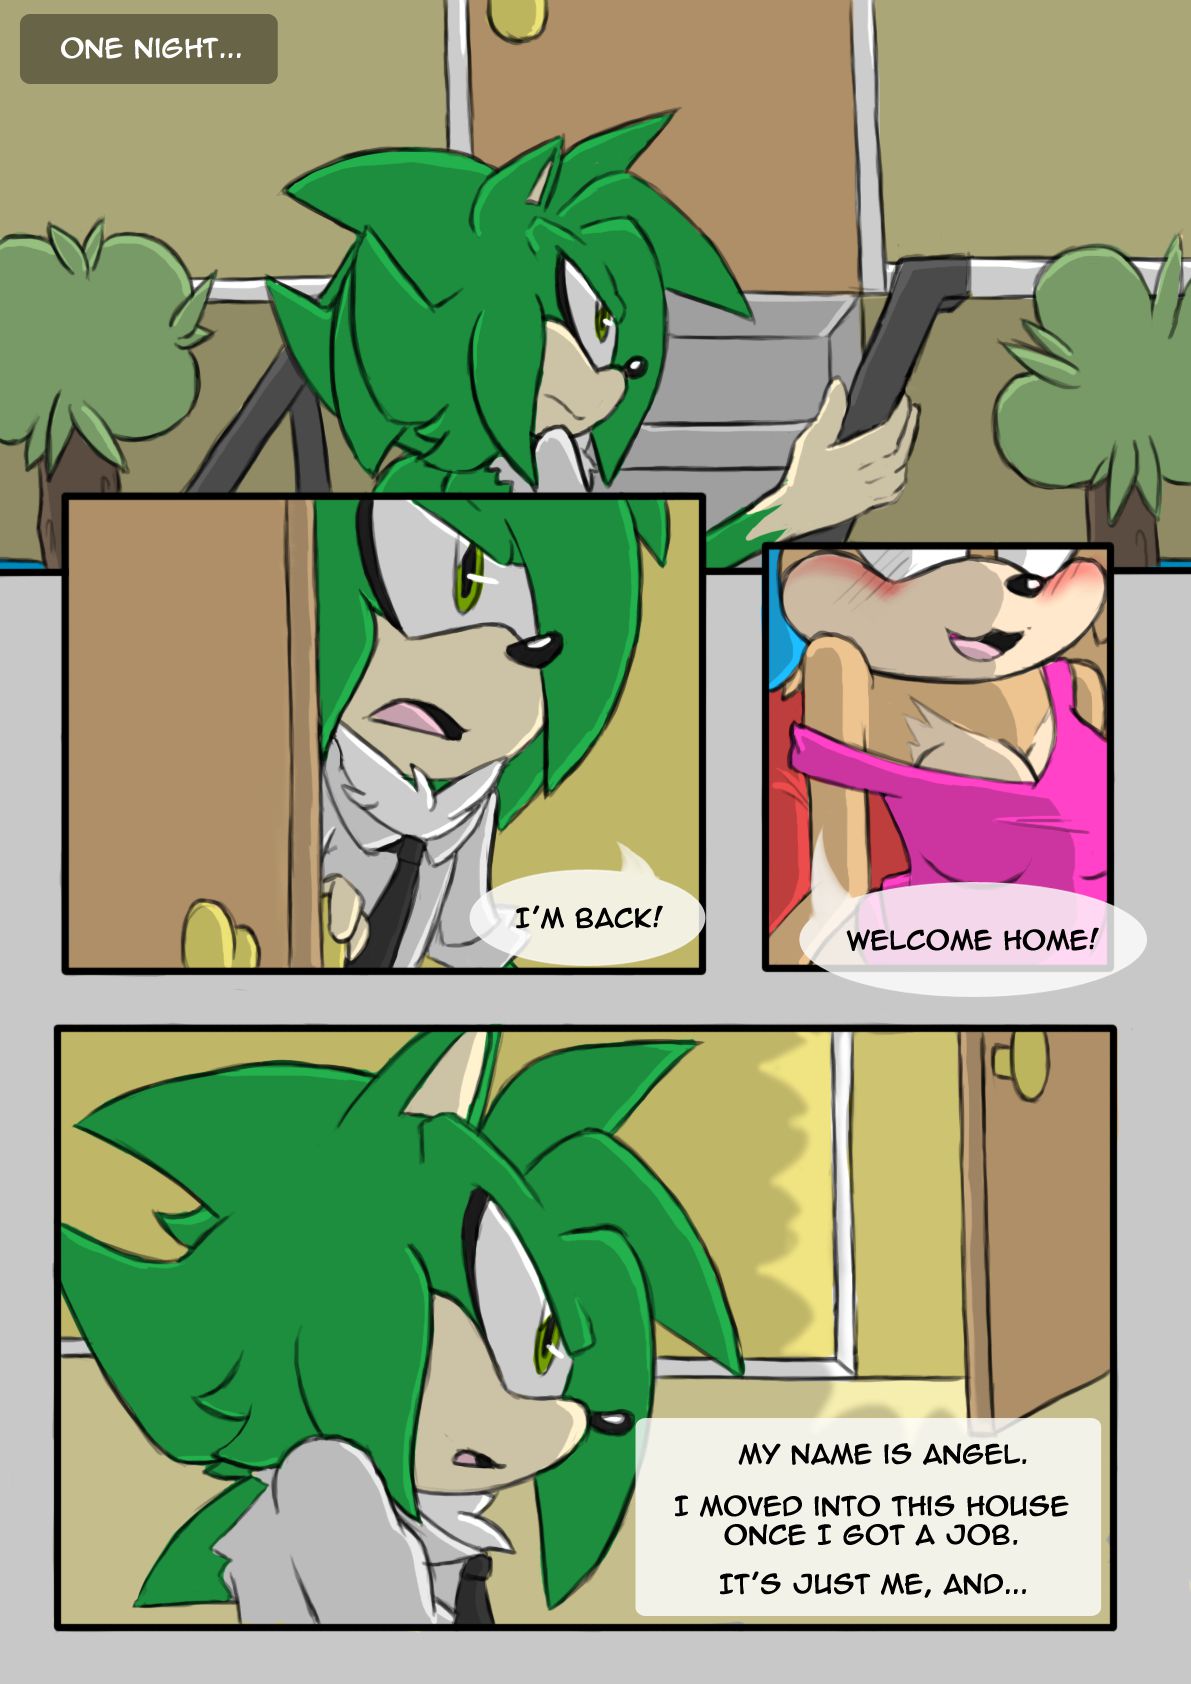 [MysteryDemon] Friends with Benefits (Sonic The Hedgehog) [Ongoing] 3